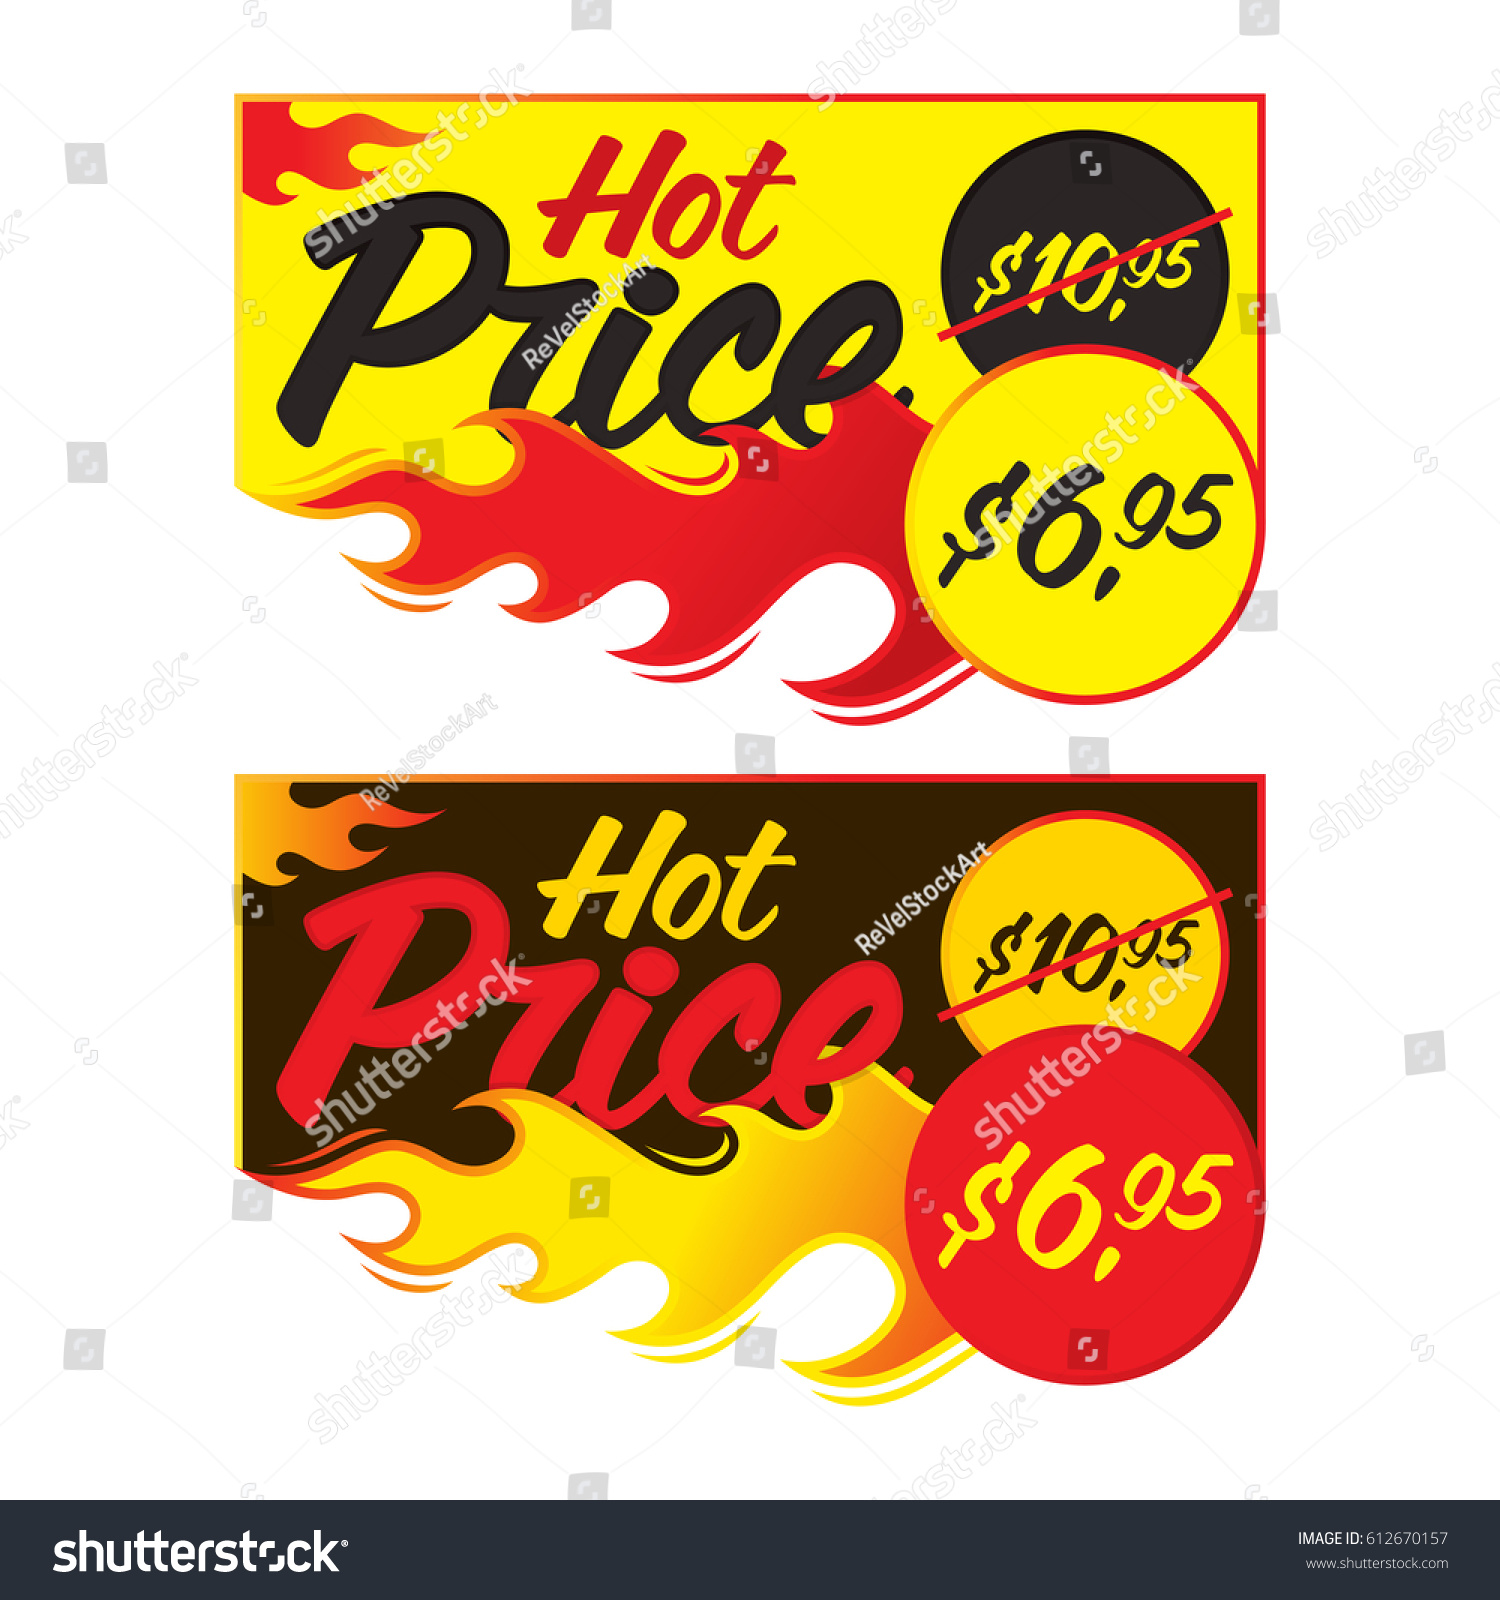 Hot price vector flaming labels stickers banners symbols templates designs. Vector illustration #612670157